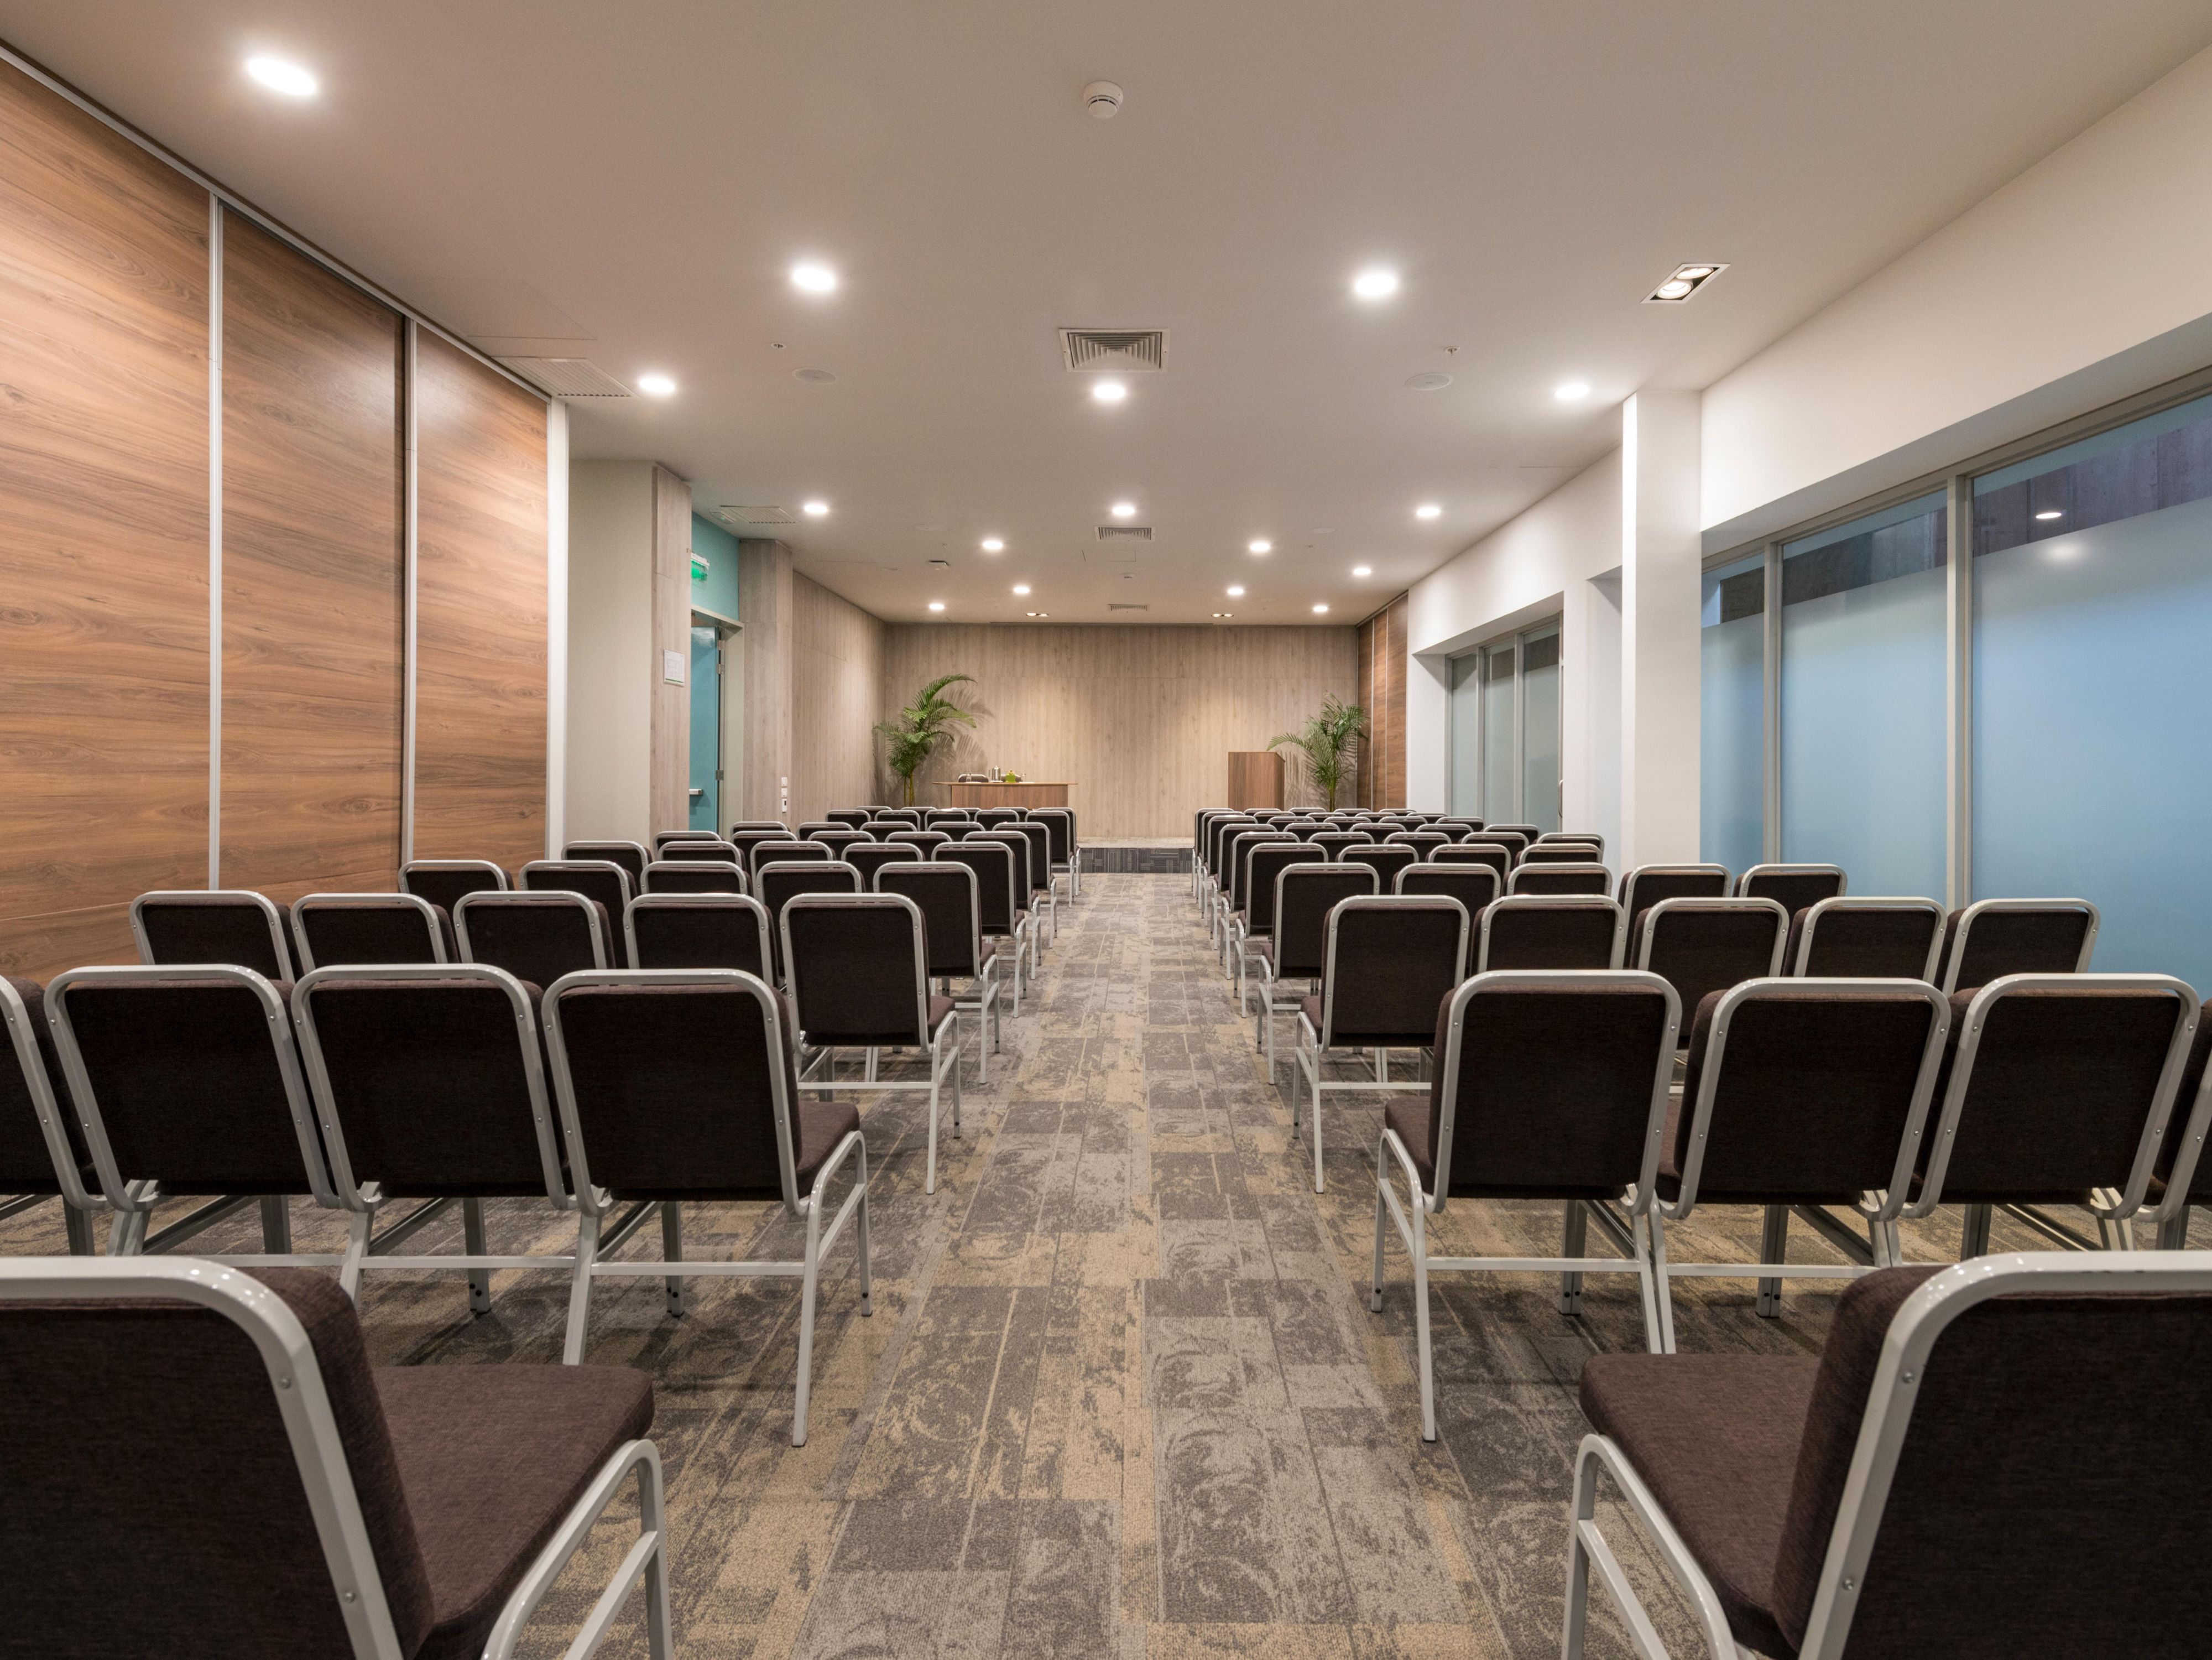 Guarantee the success of your event booking with our event rooms in front of the airport. We have everything you need to cover your needs and ensure that your event is held with the professionalism that your company or association requires.